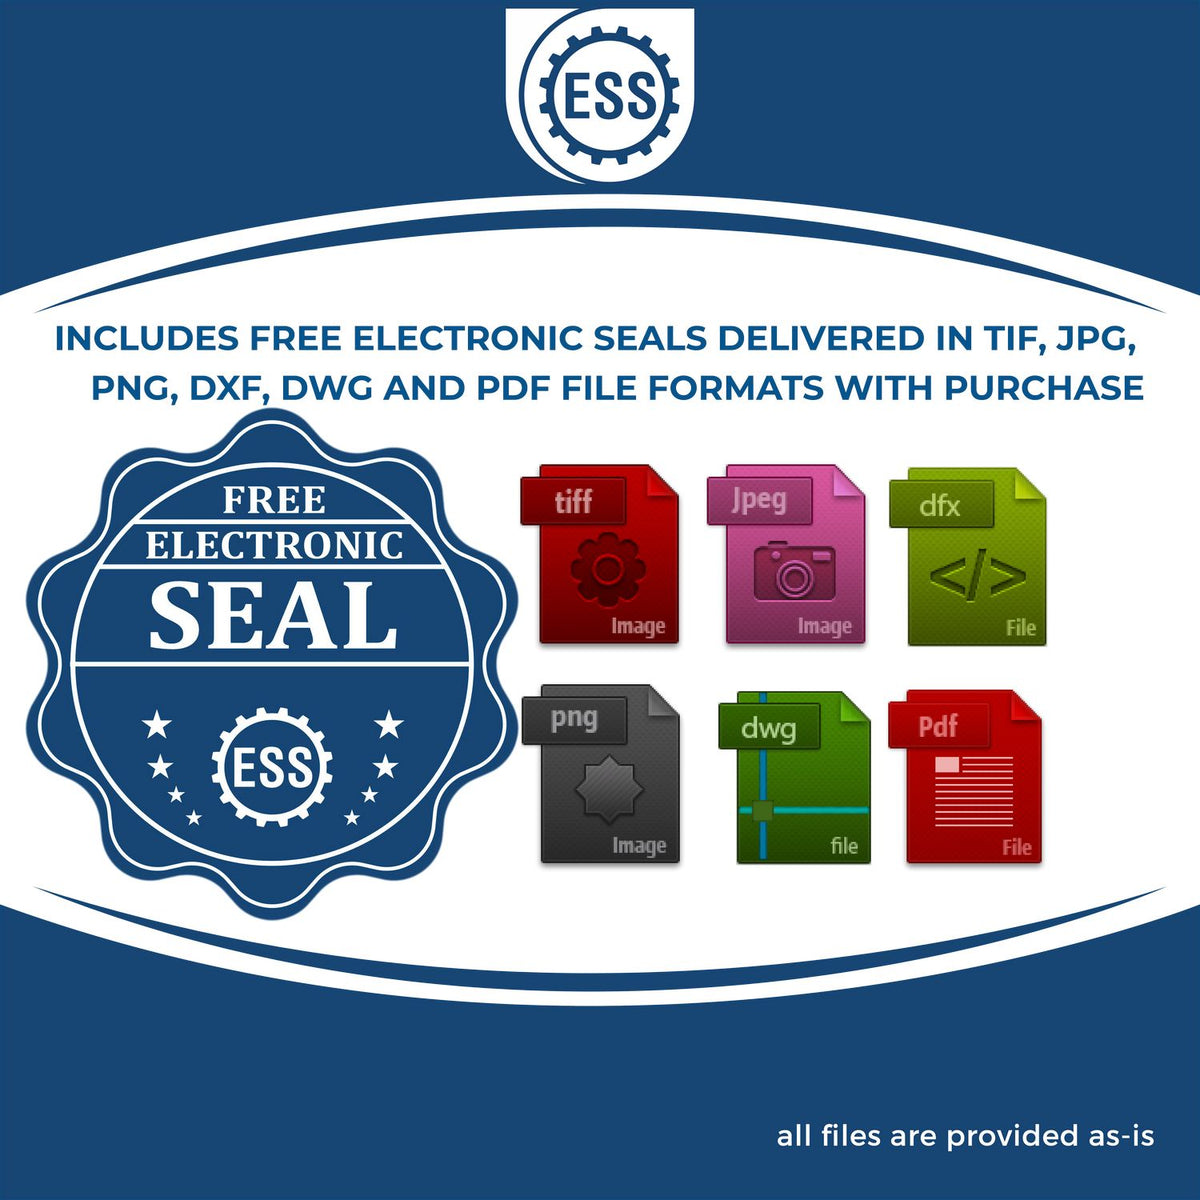 An infographic for the free electronic seal for the Tennessee Professional Geologist Seal Stamp illustrating the different file type icons such as DXF, DWG, TIF, JPG and PNG.